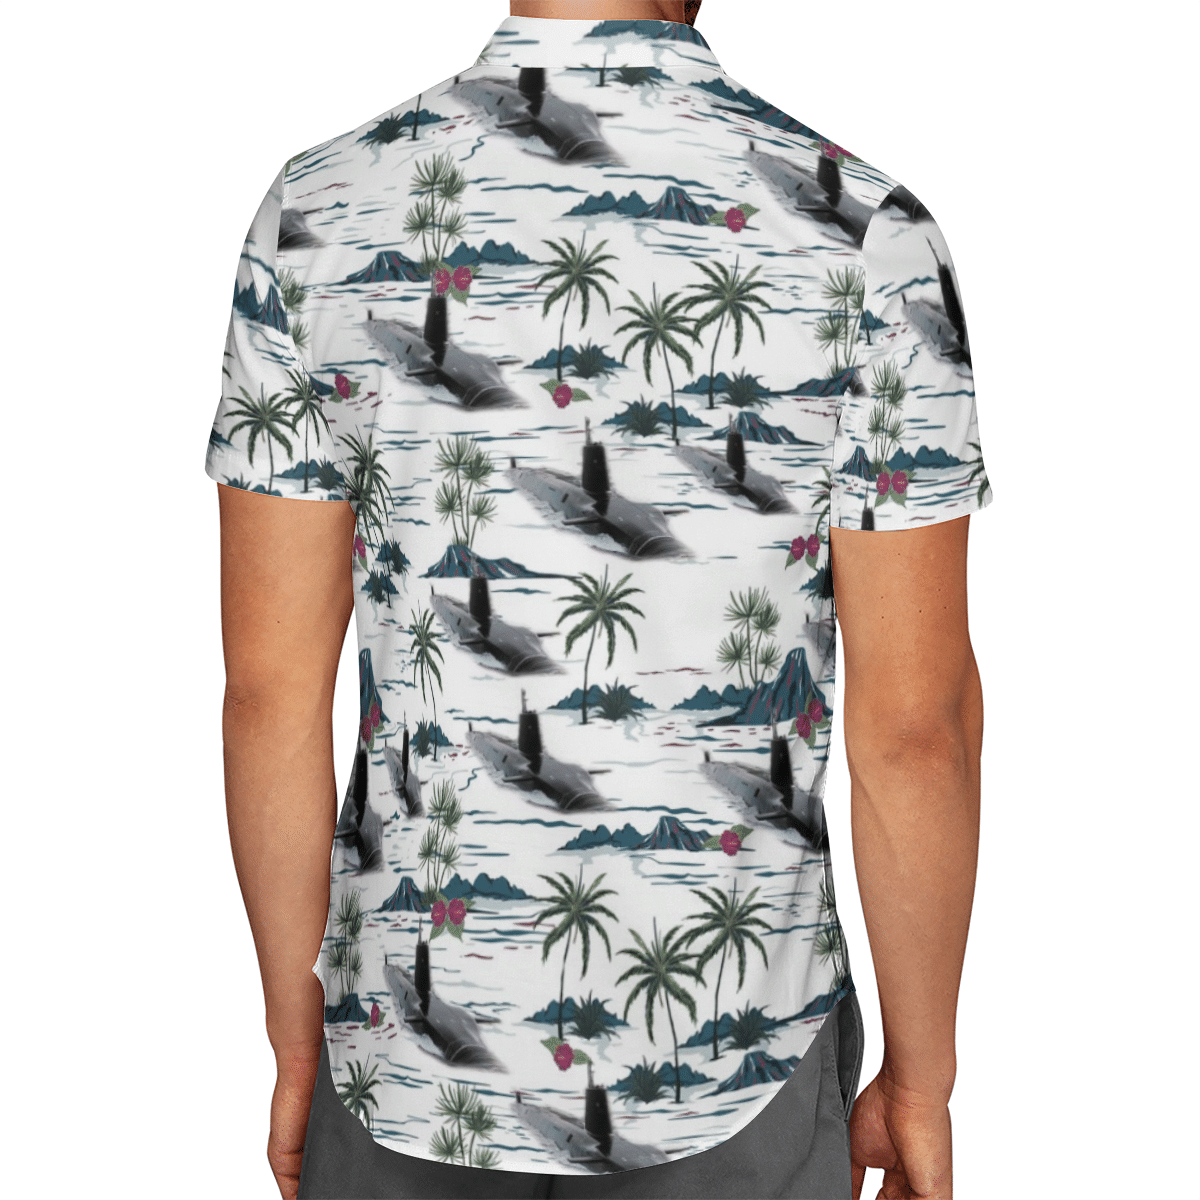 Going to the beach with a quality shirt 212